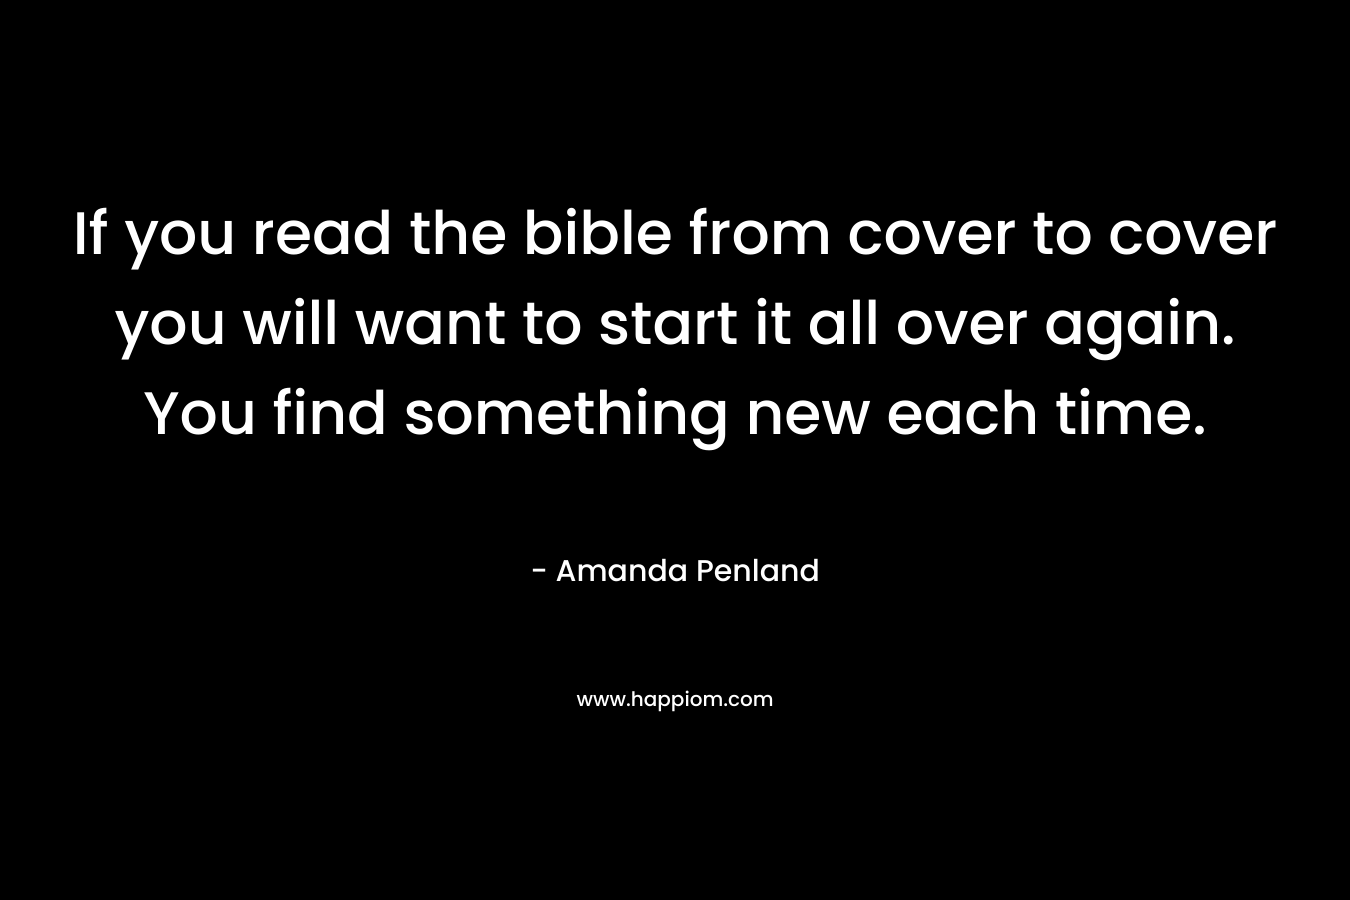 If you read the bible from cover to cover you will want to start it all over again. You find something new each time. – Amanda Penland